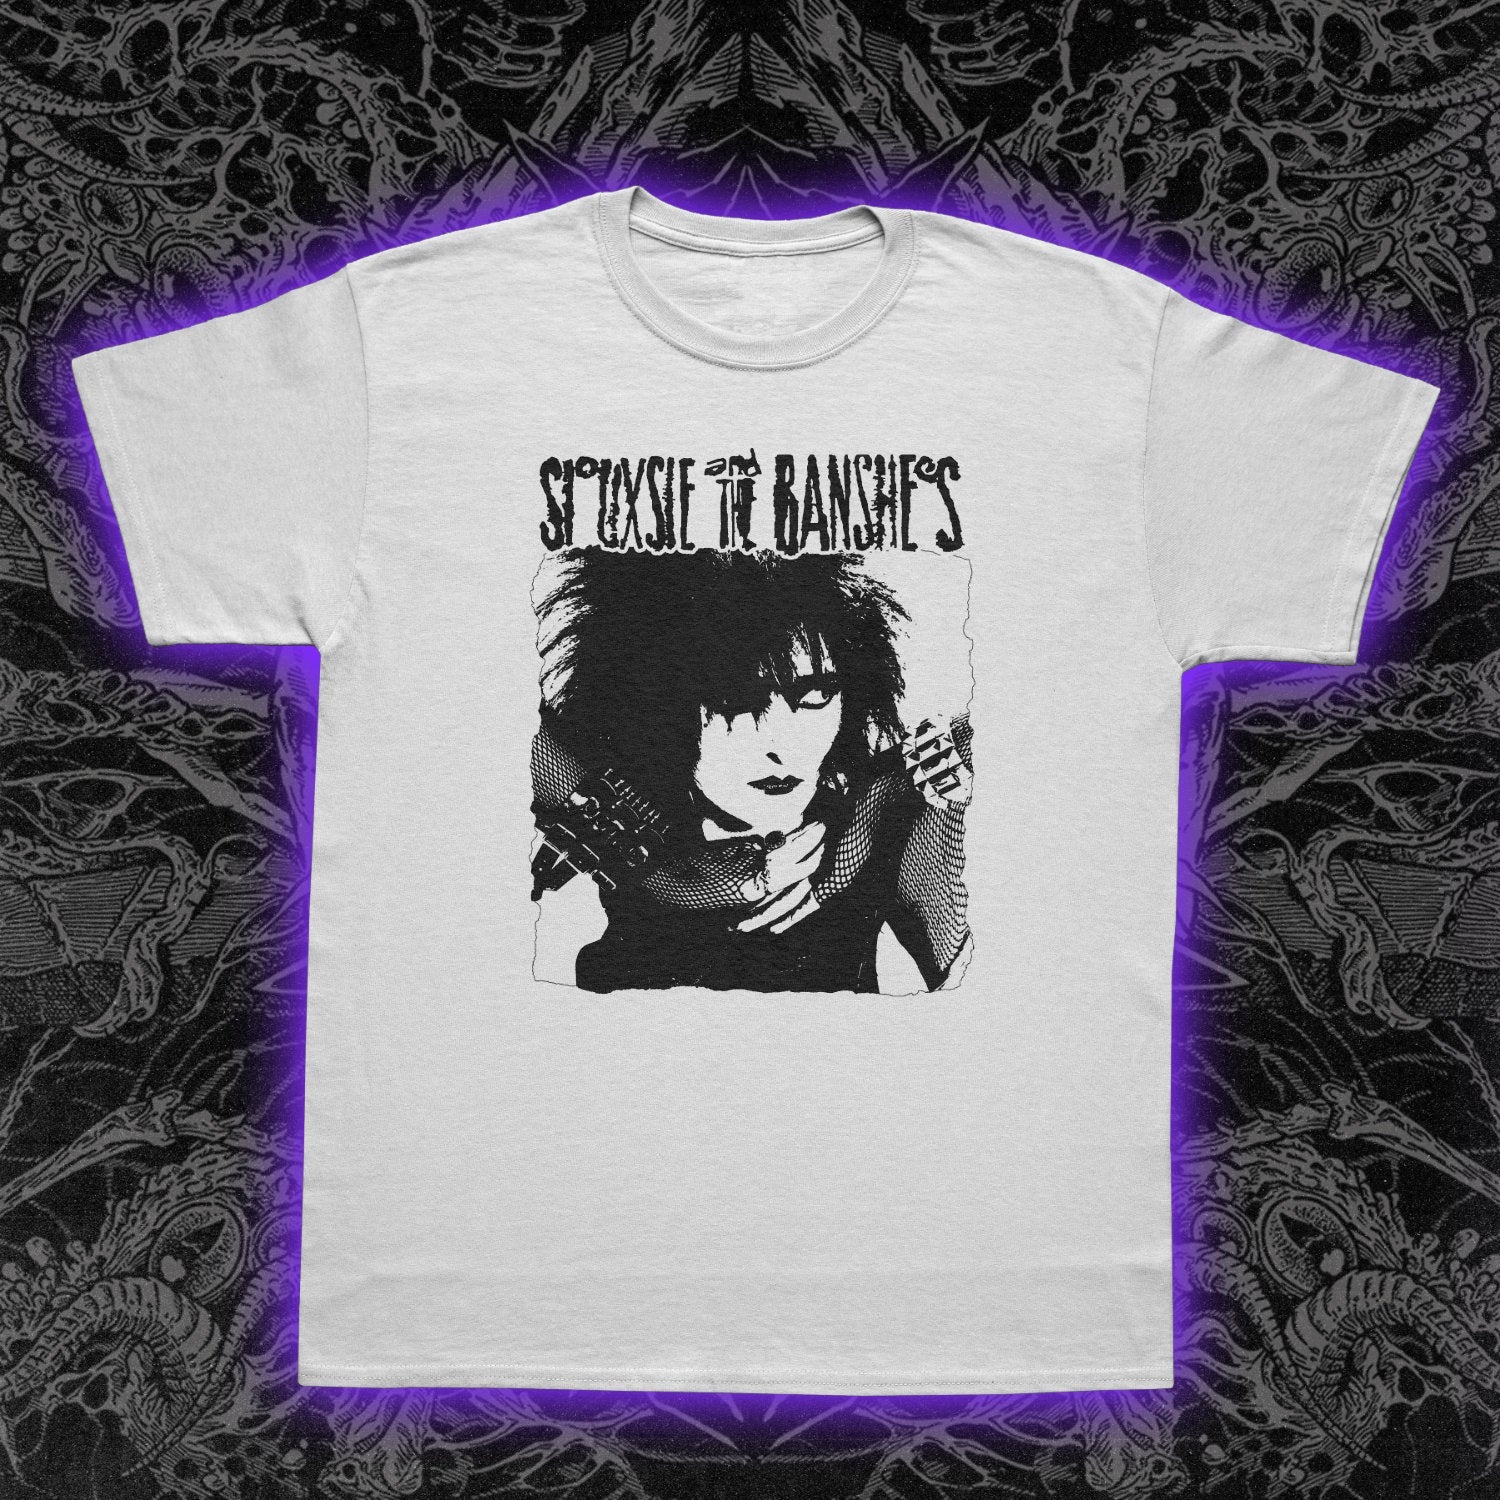 Siouxsie And The Banshees Portrait Premium Tee